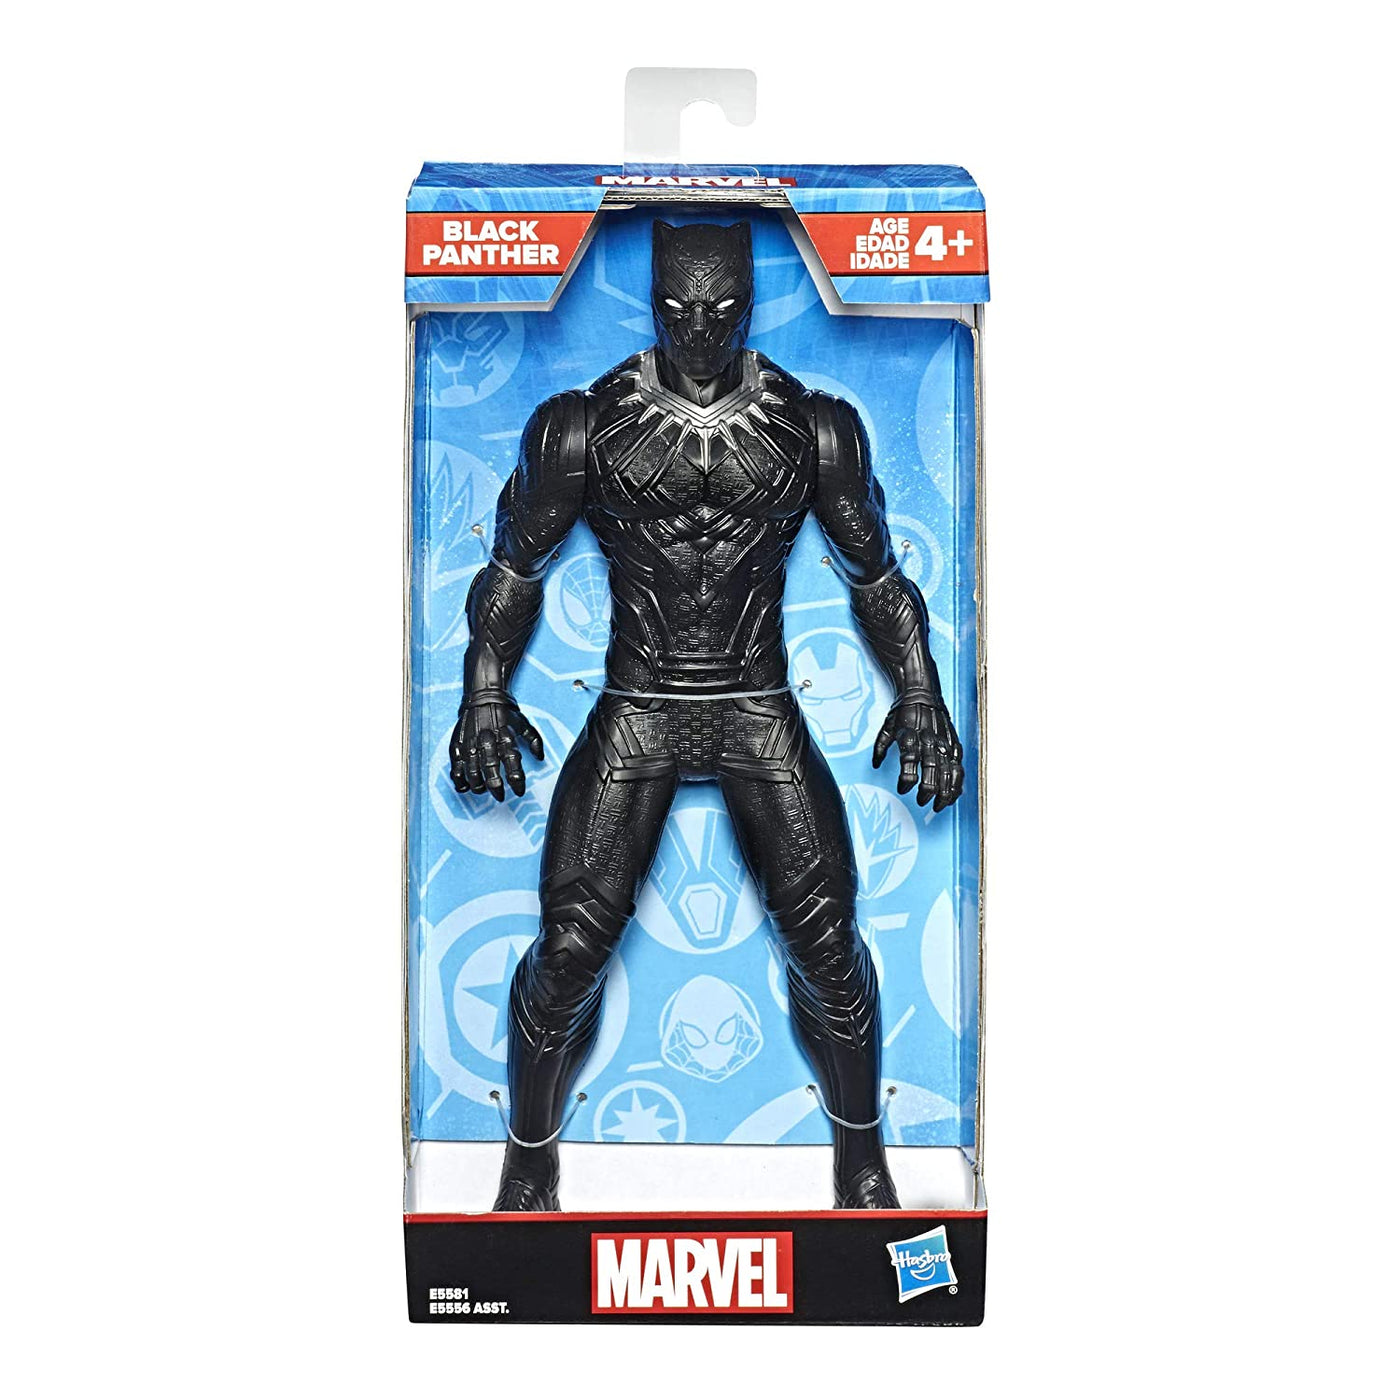 Marvel Black Panther Action Figure (9.5 Inch) | Hasbro